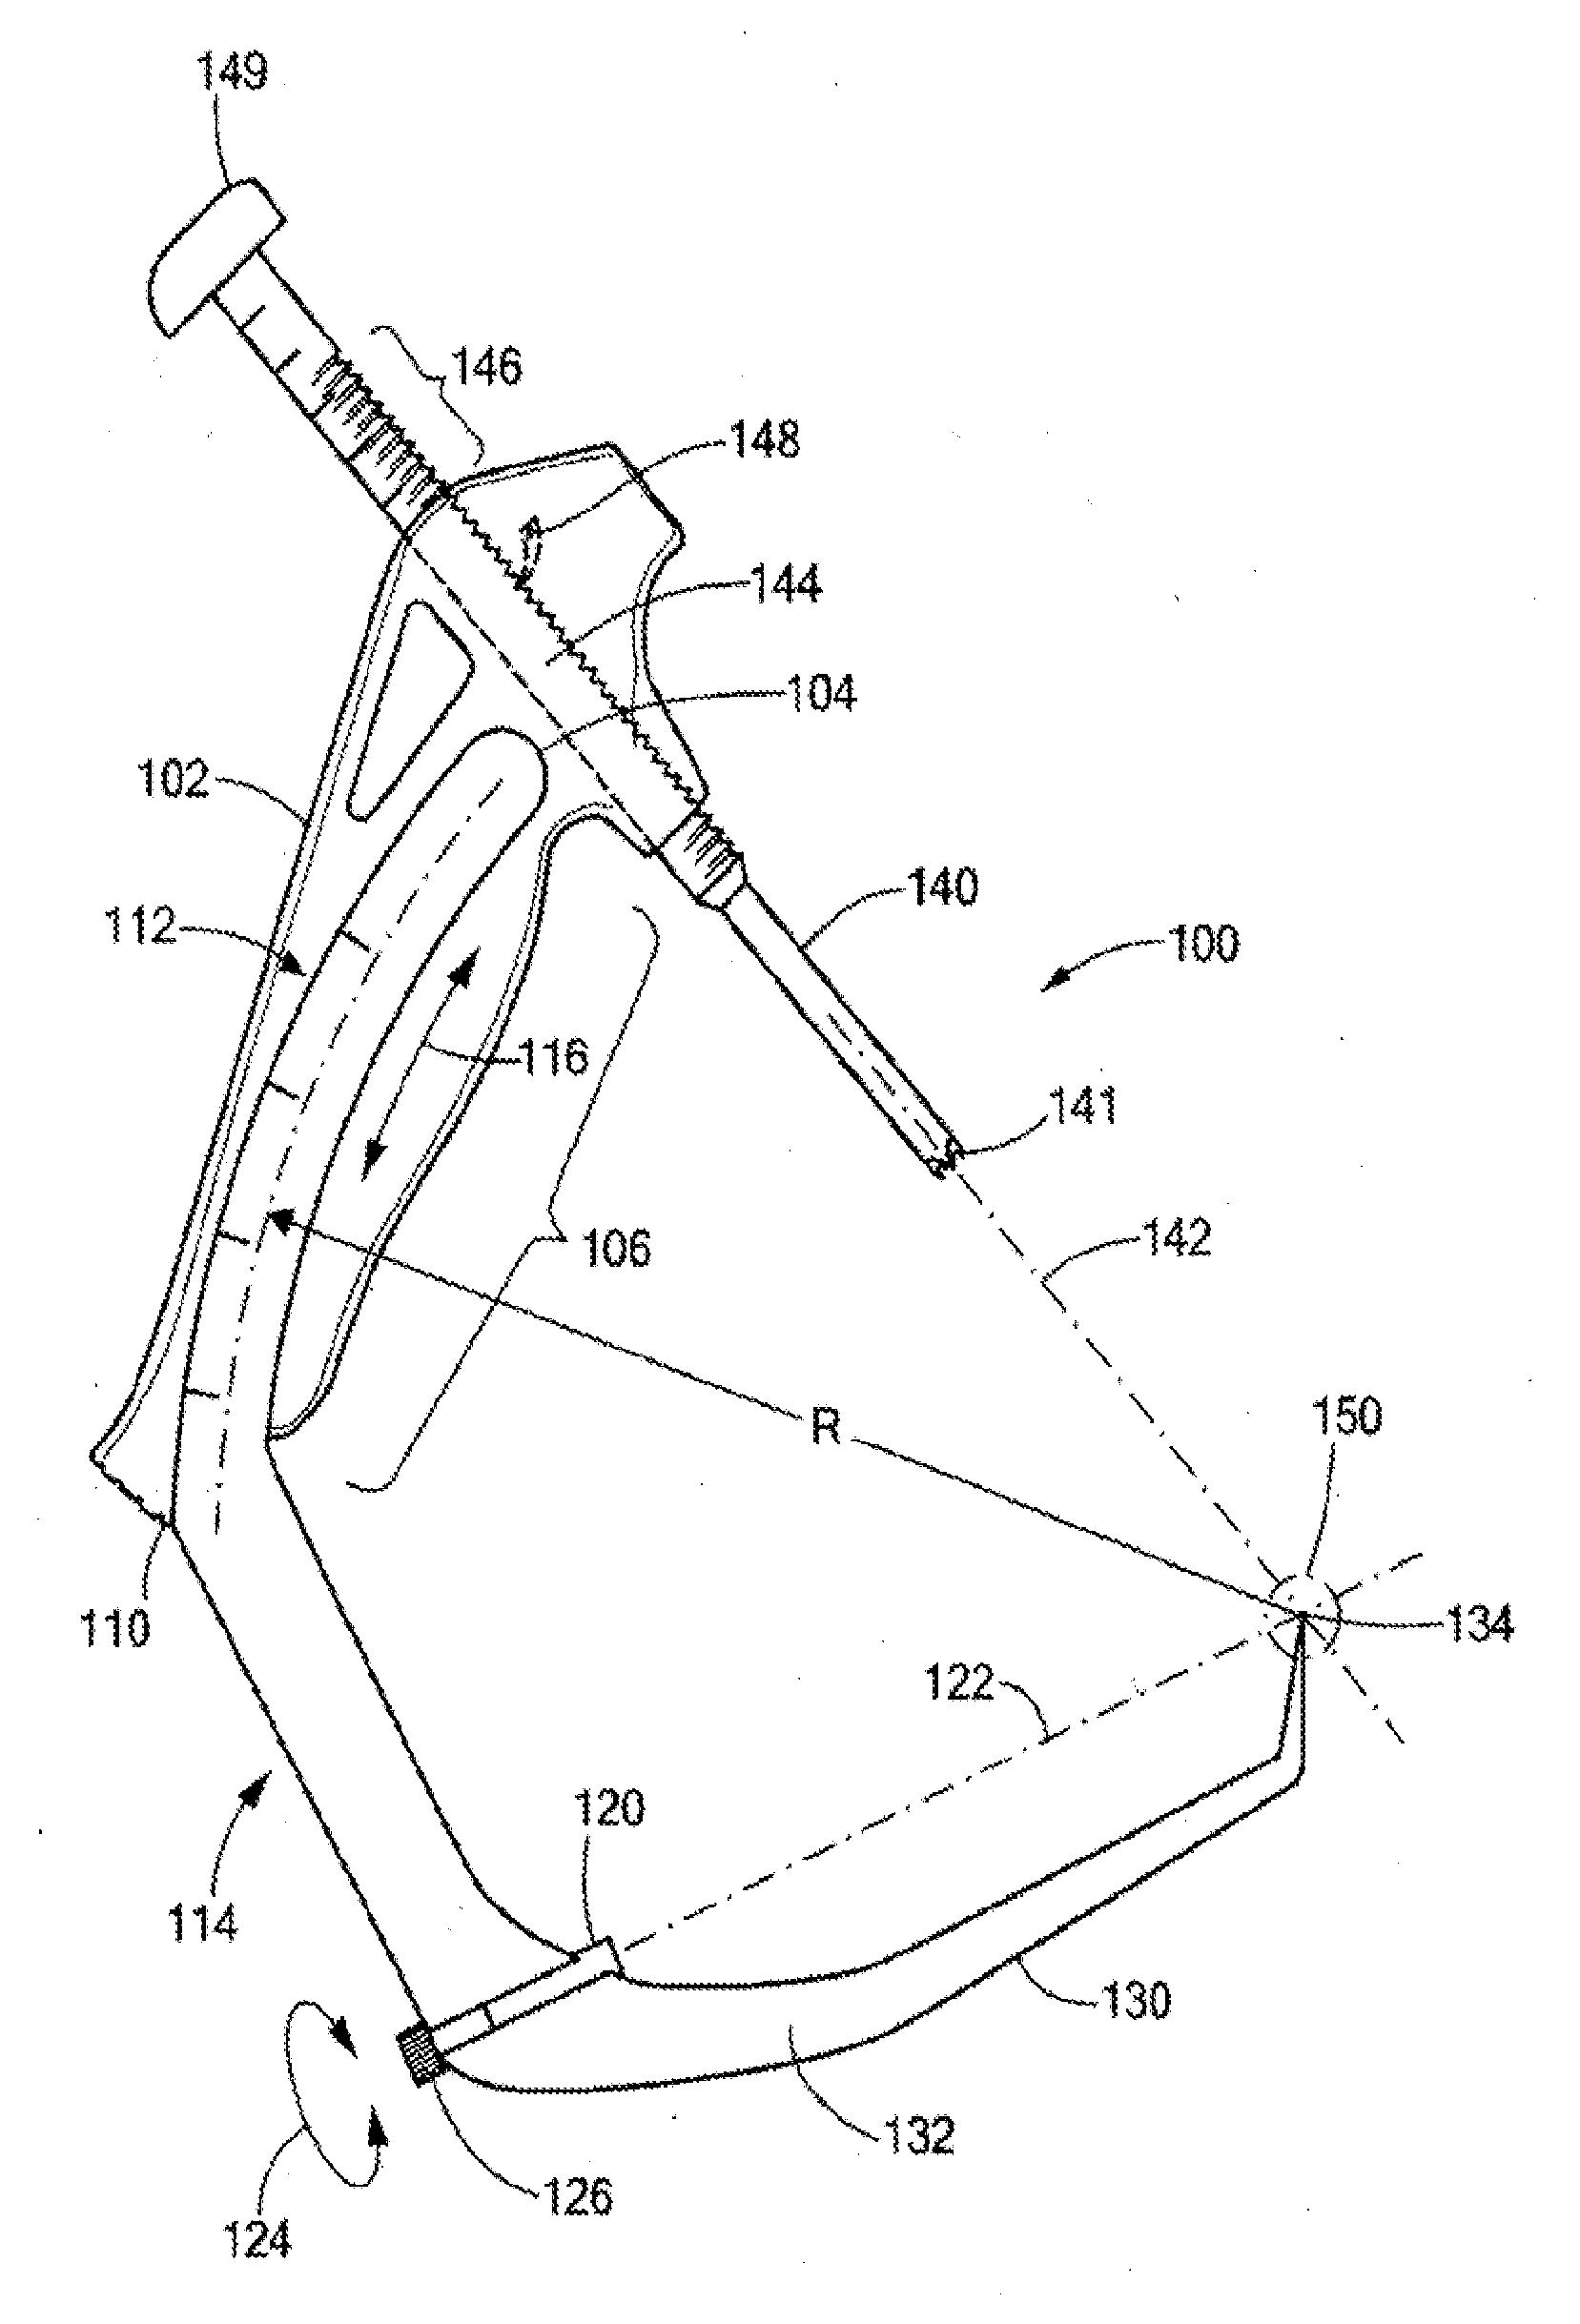 Surgical aiming device